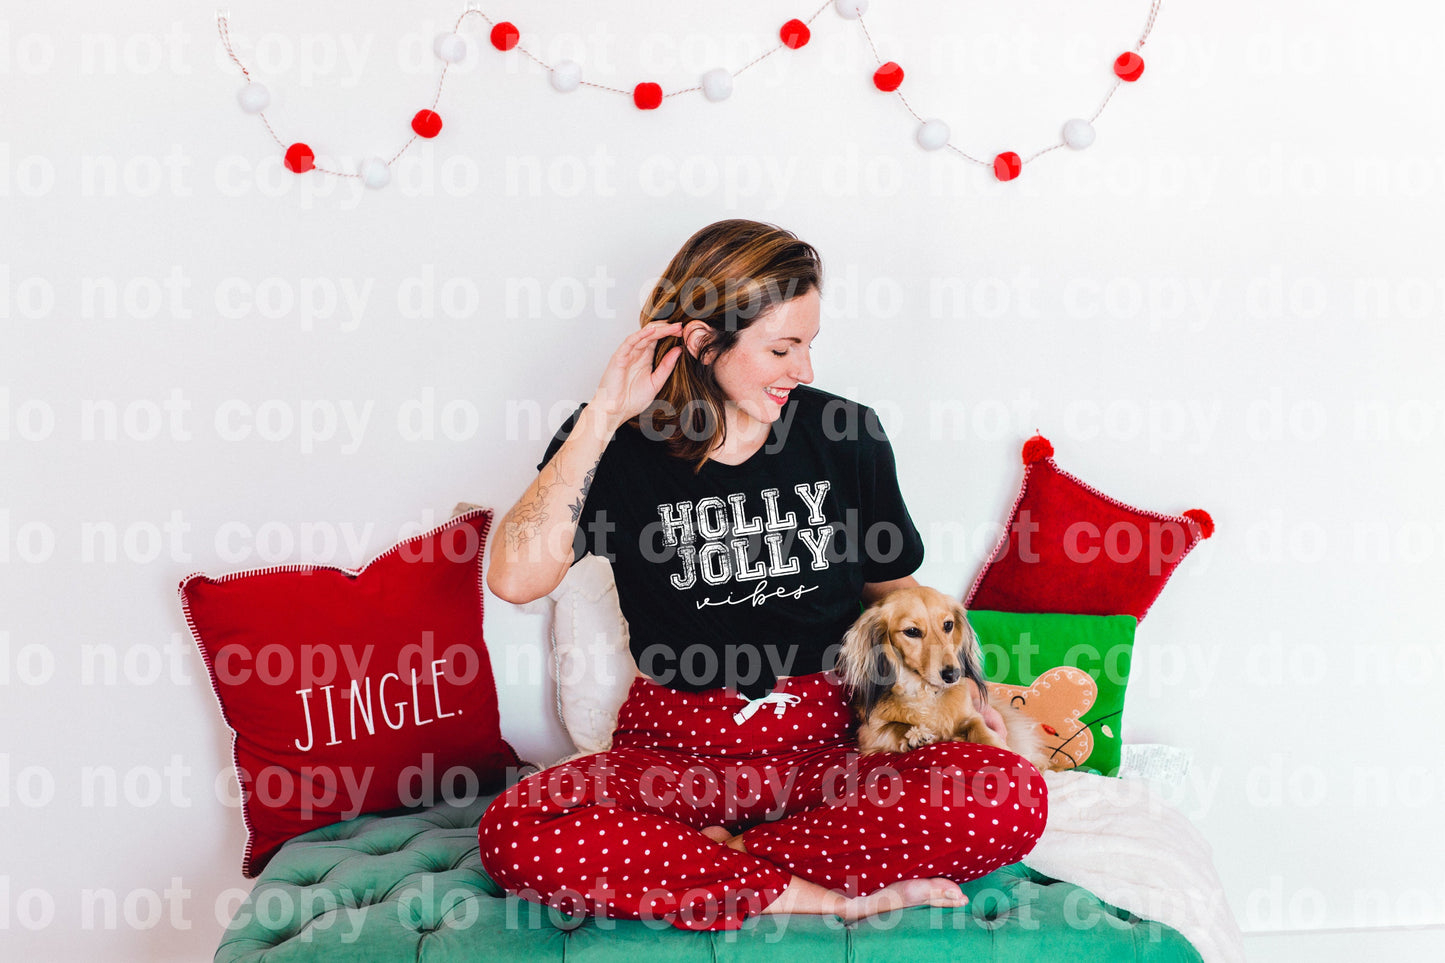 Holly Jolly Vibes Distressed Black/White Dream Print or Sublimation Print